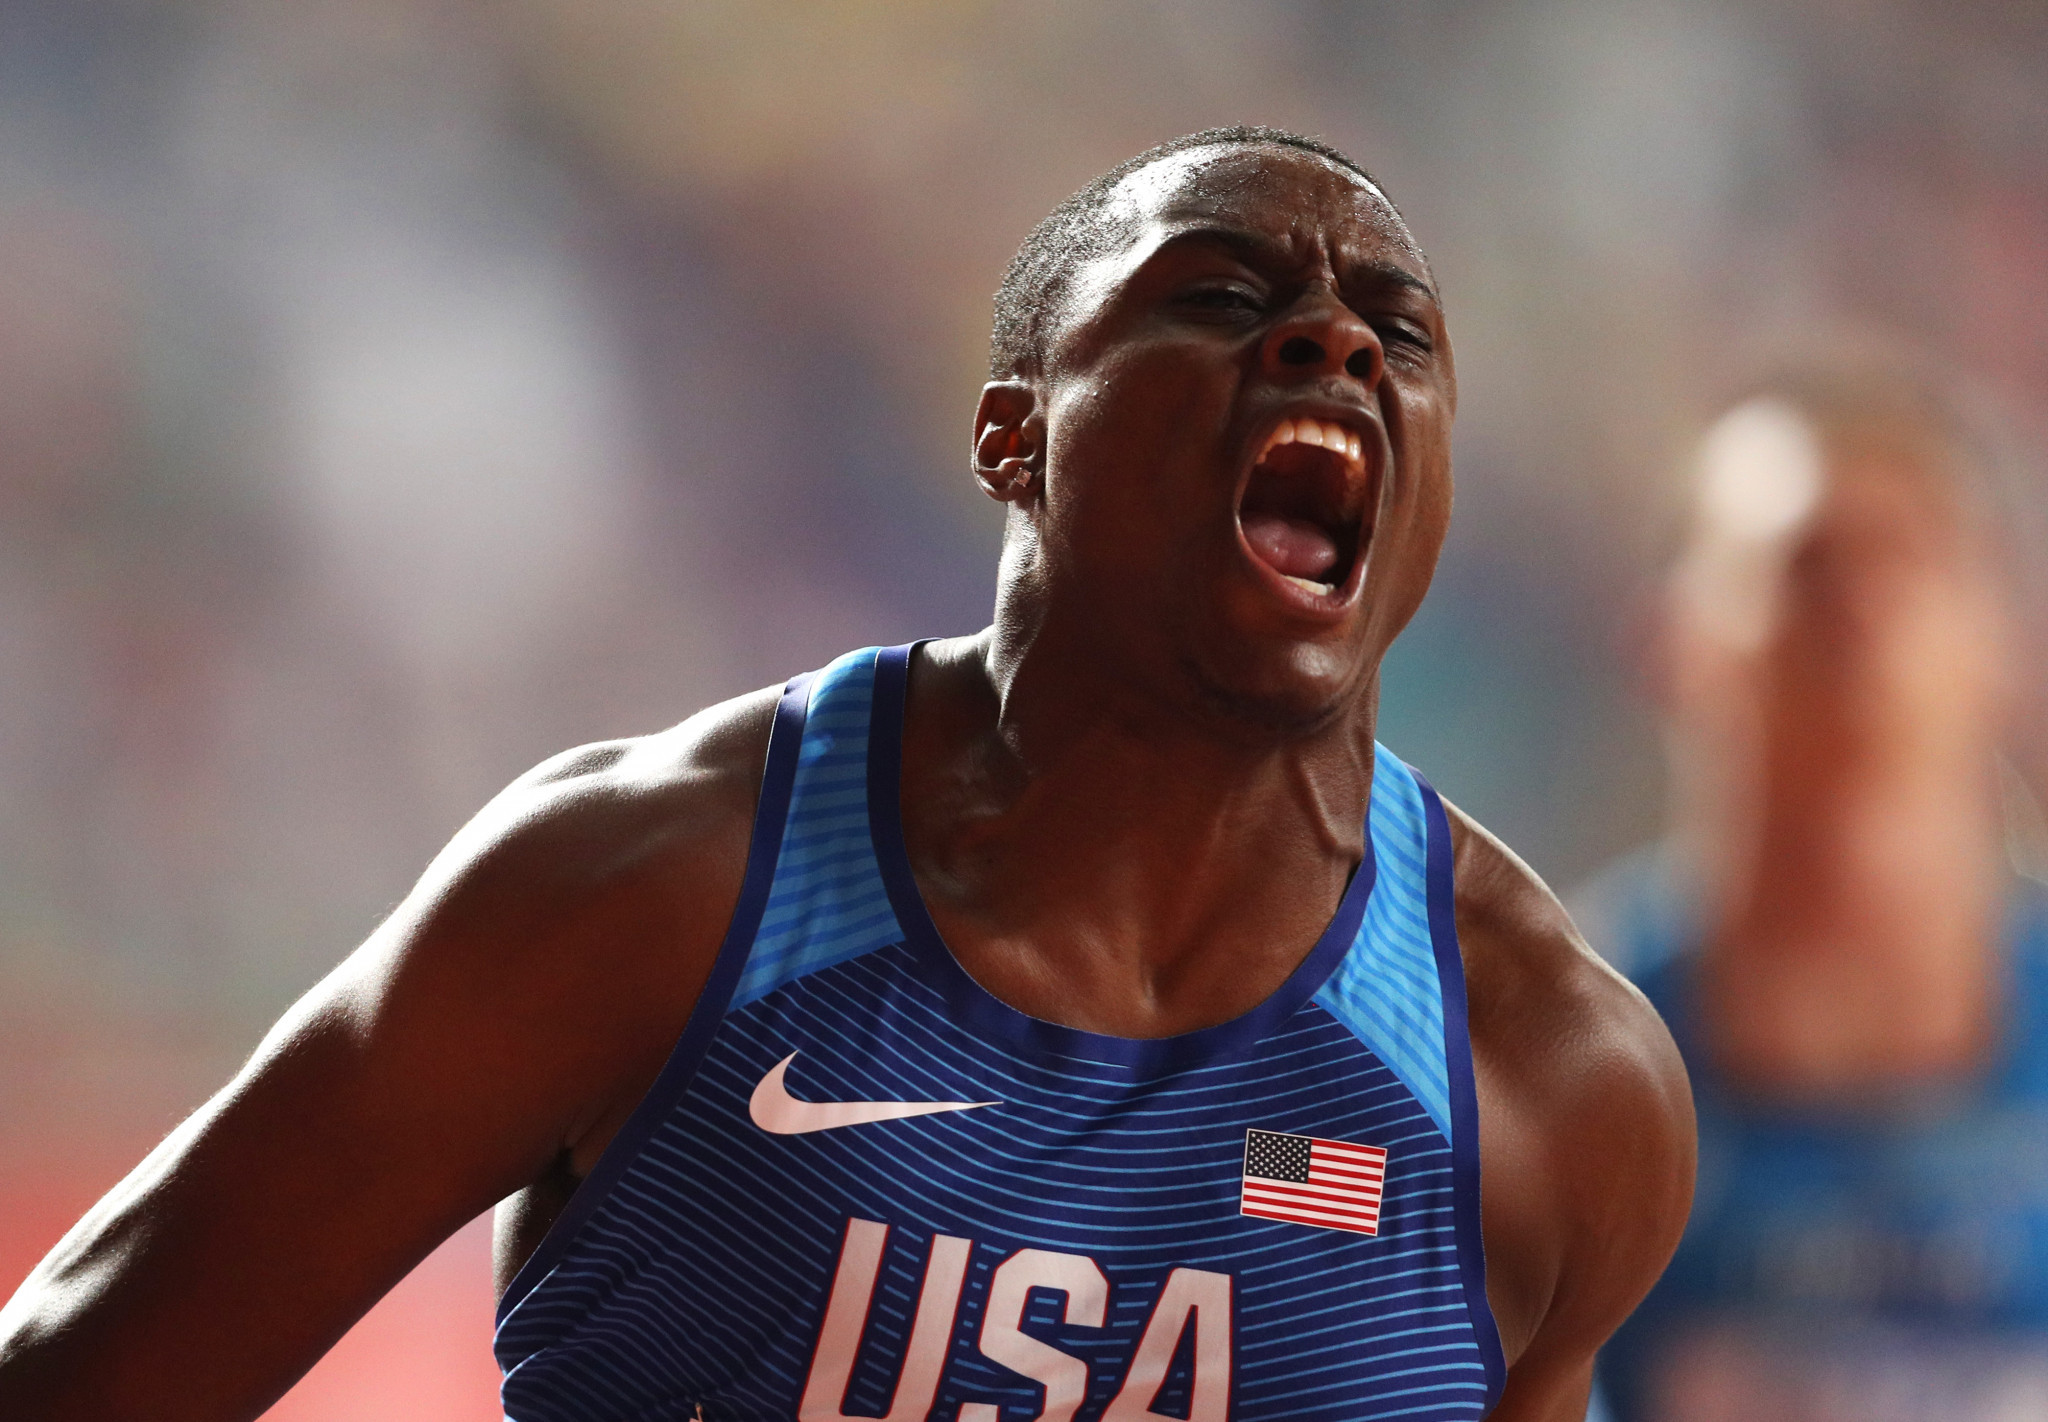 World 100 metres champion Christian Coleman says he plans to appeal against the two-year ban imposed upon him for whereabouts failures ©Getty Images